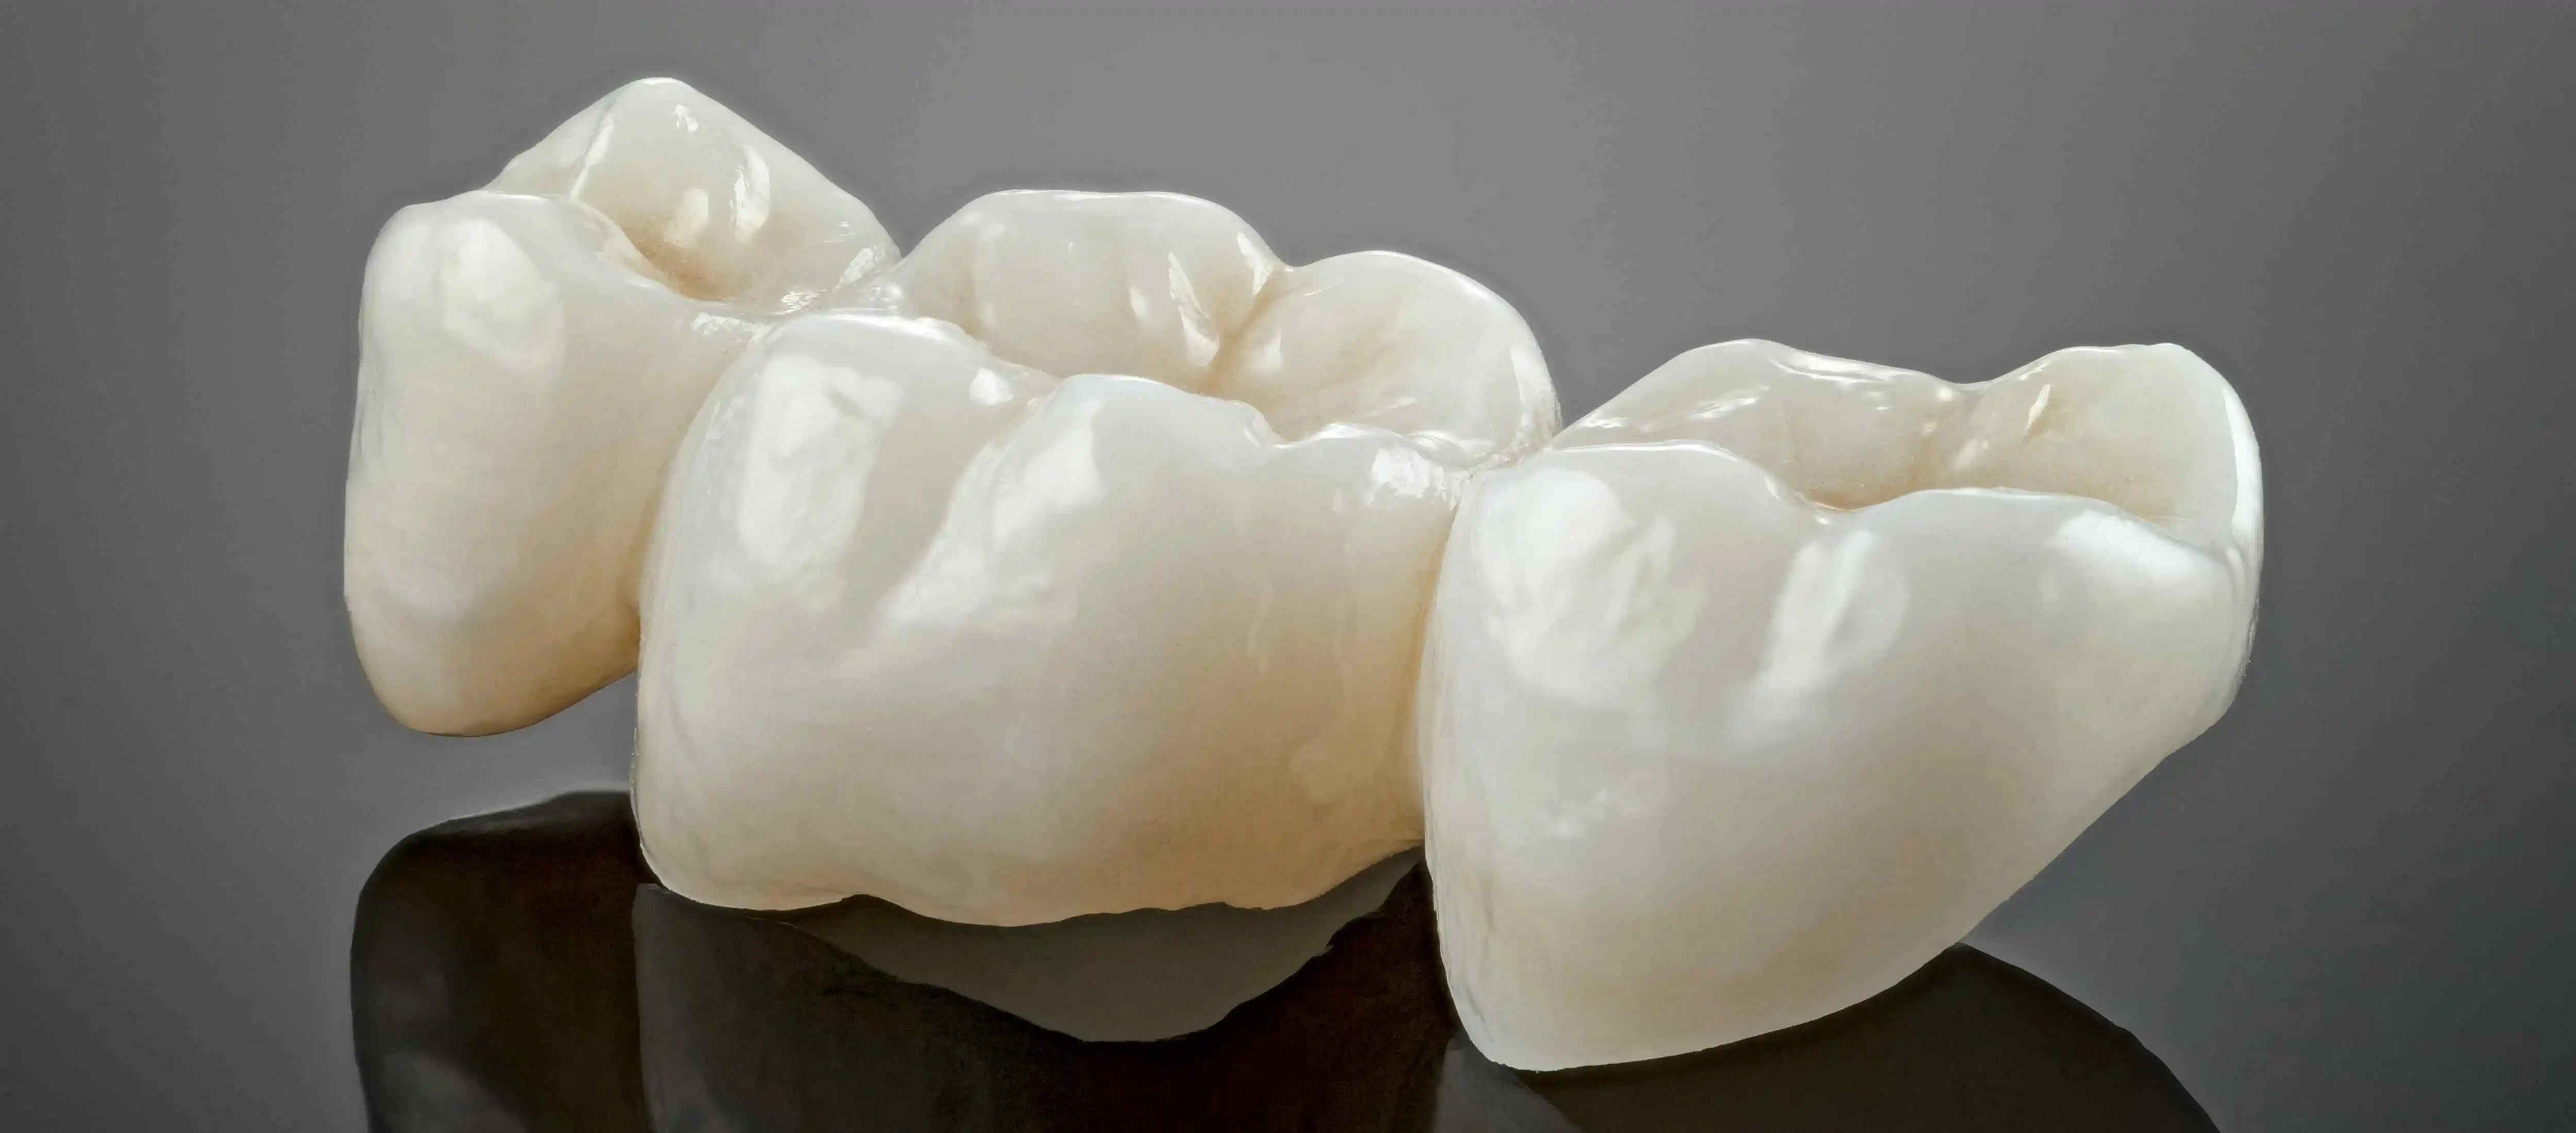 How Dental Crowns Can Give You a Smile Transformation